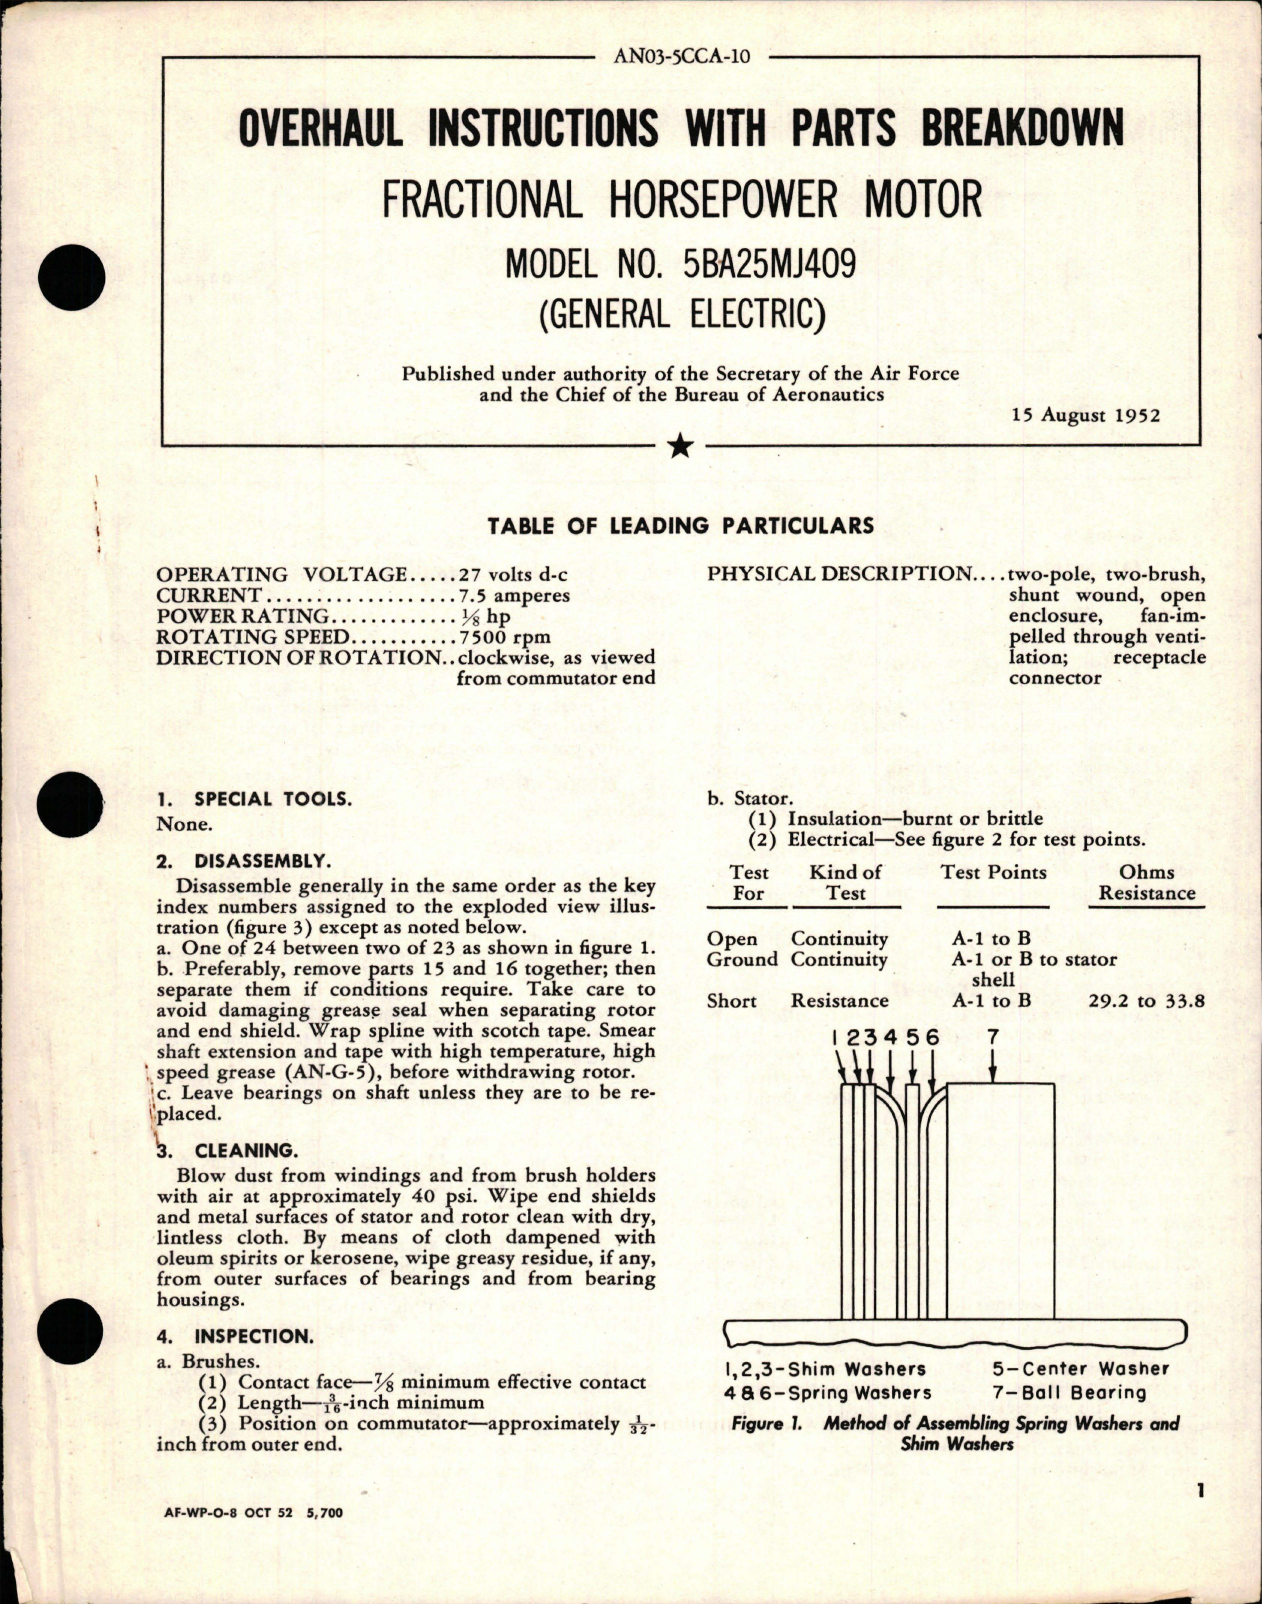 Sample page 1 from AirCorps Library document: Overhaul Instructions with Parts Breakdown for Fractional Horsepower Motor - Model 5BA25MJ409